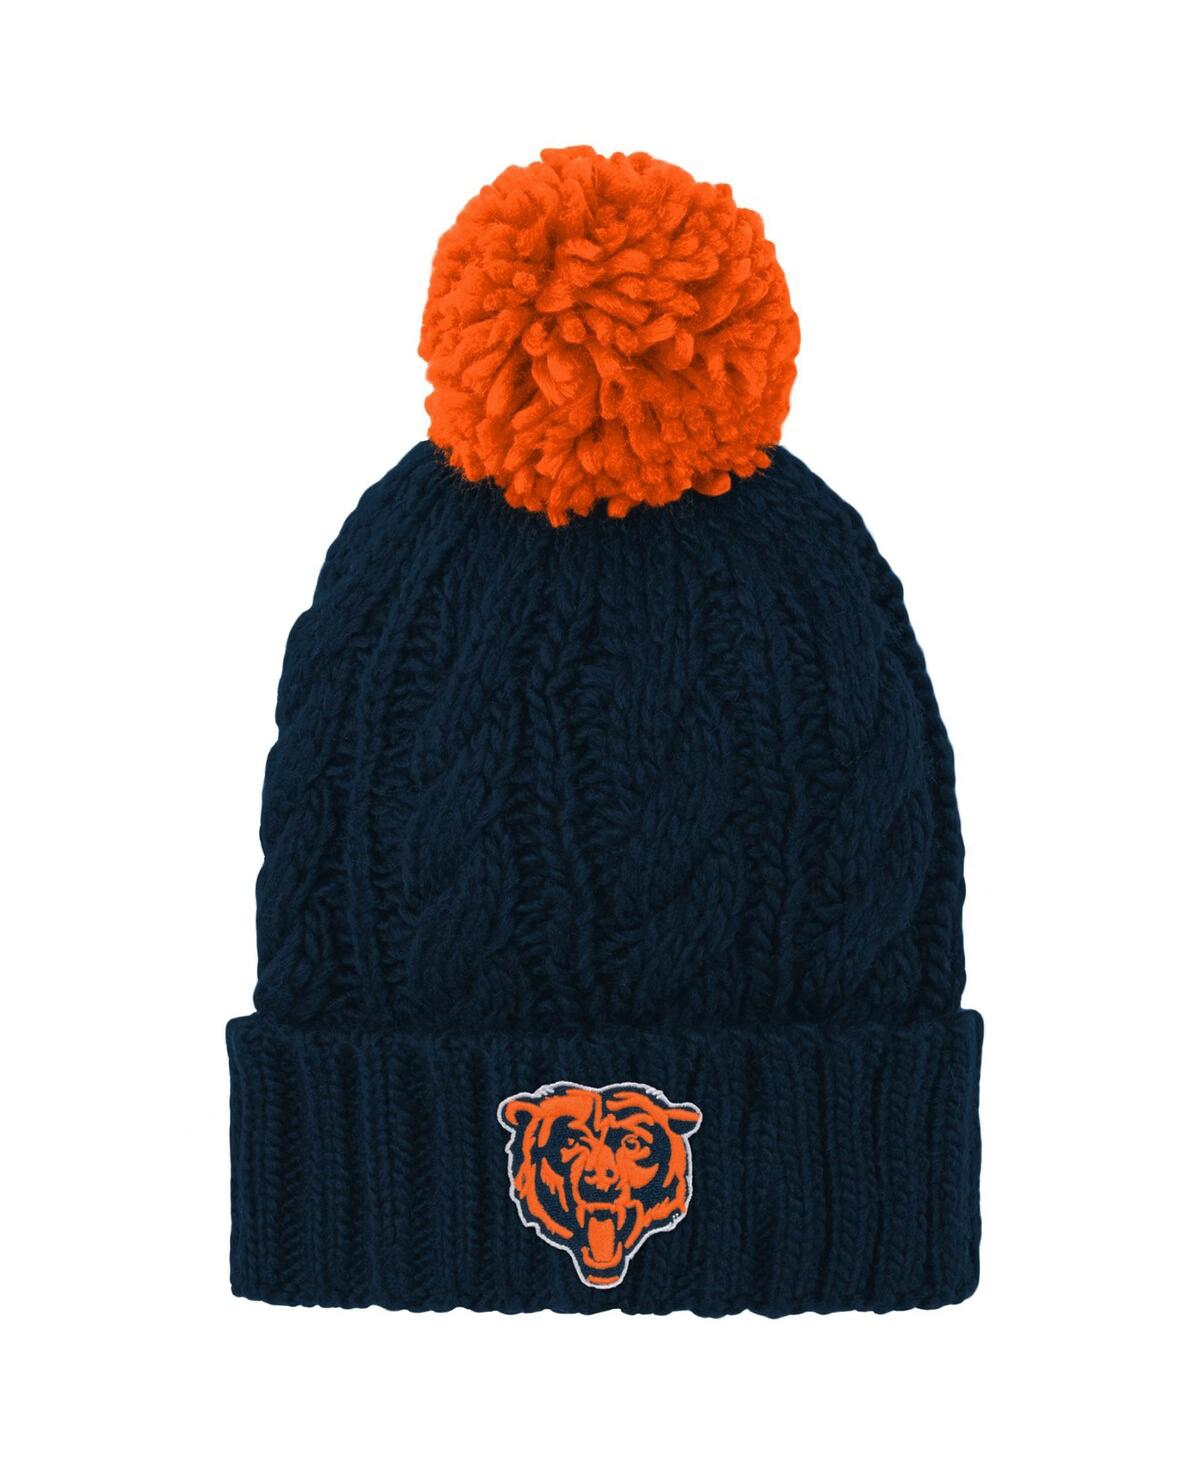 Outerstuff Kids' Big Girls Navy Chicago Bears Team Cable Cuffed Knit Hat With Pom